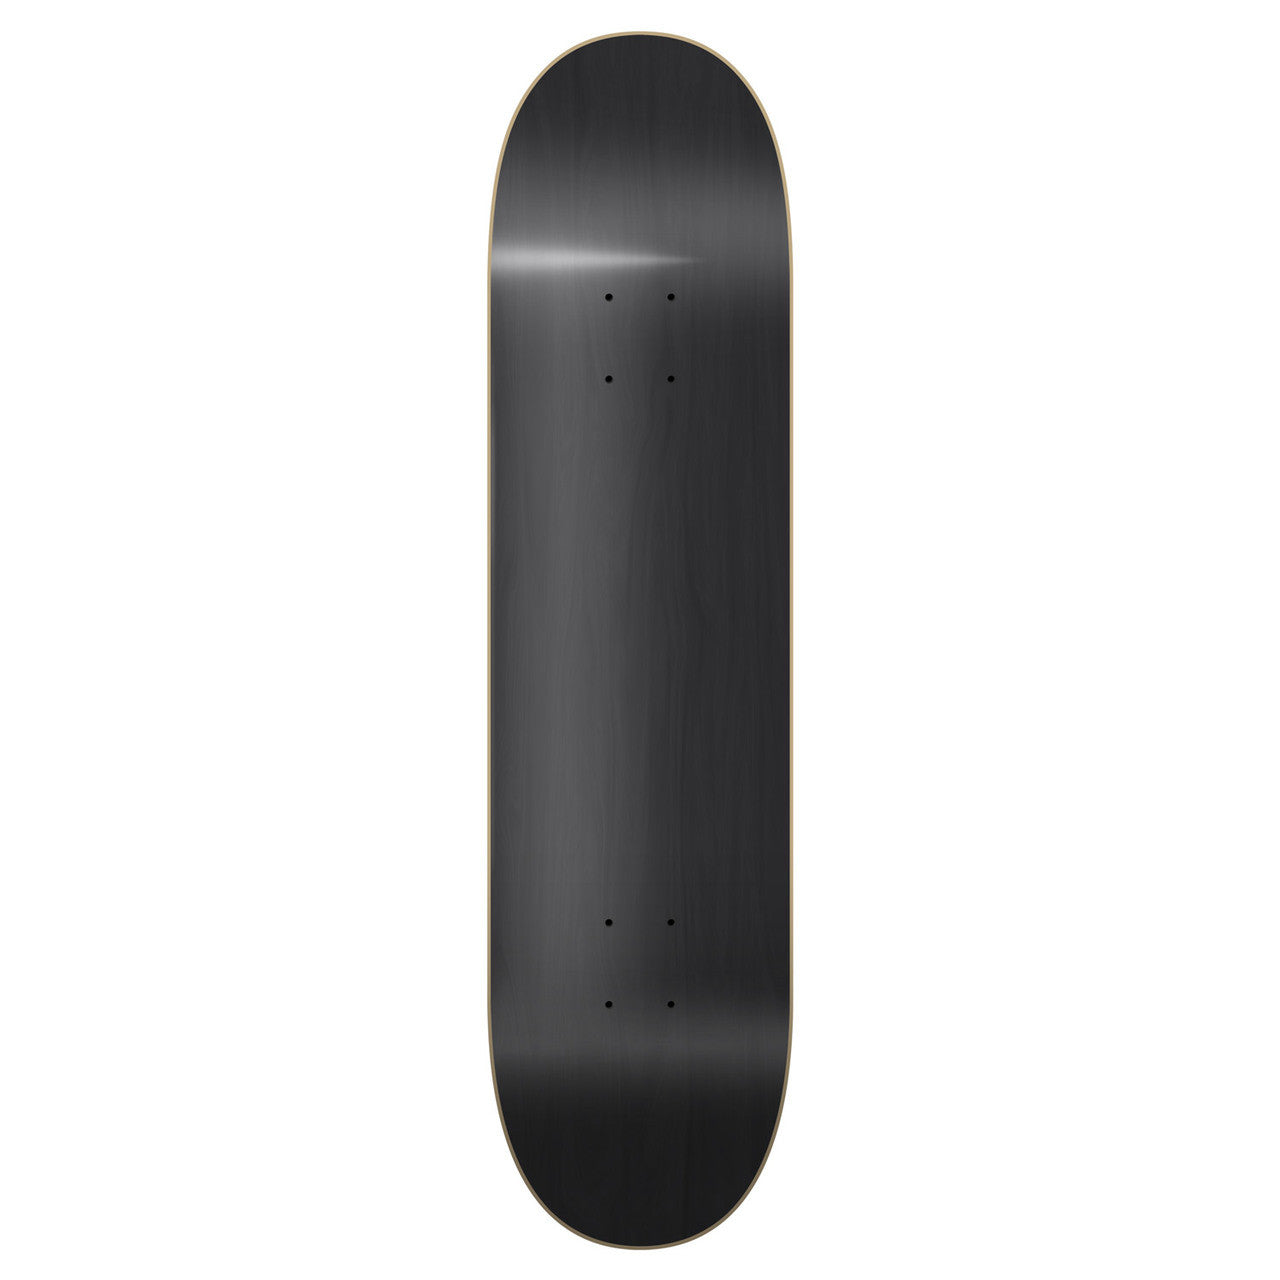 Yocaher Blank Skateboard Deck - Stained Black